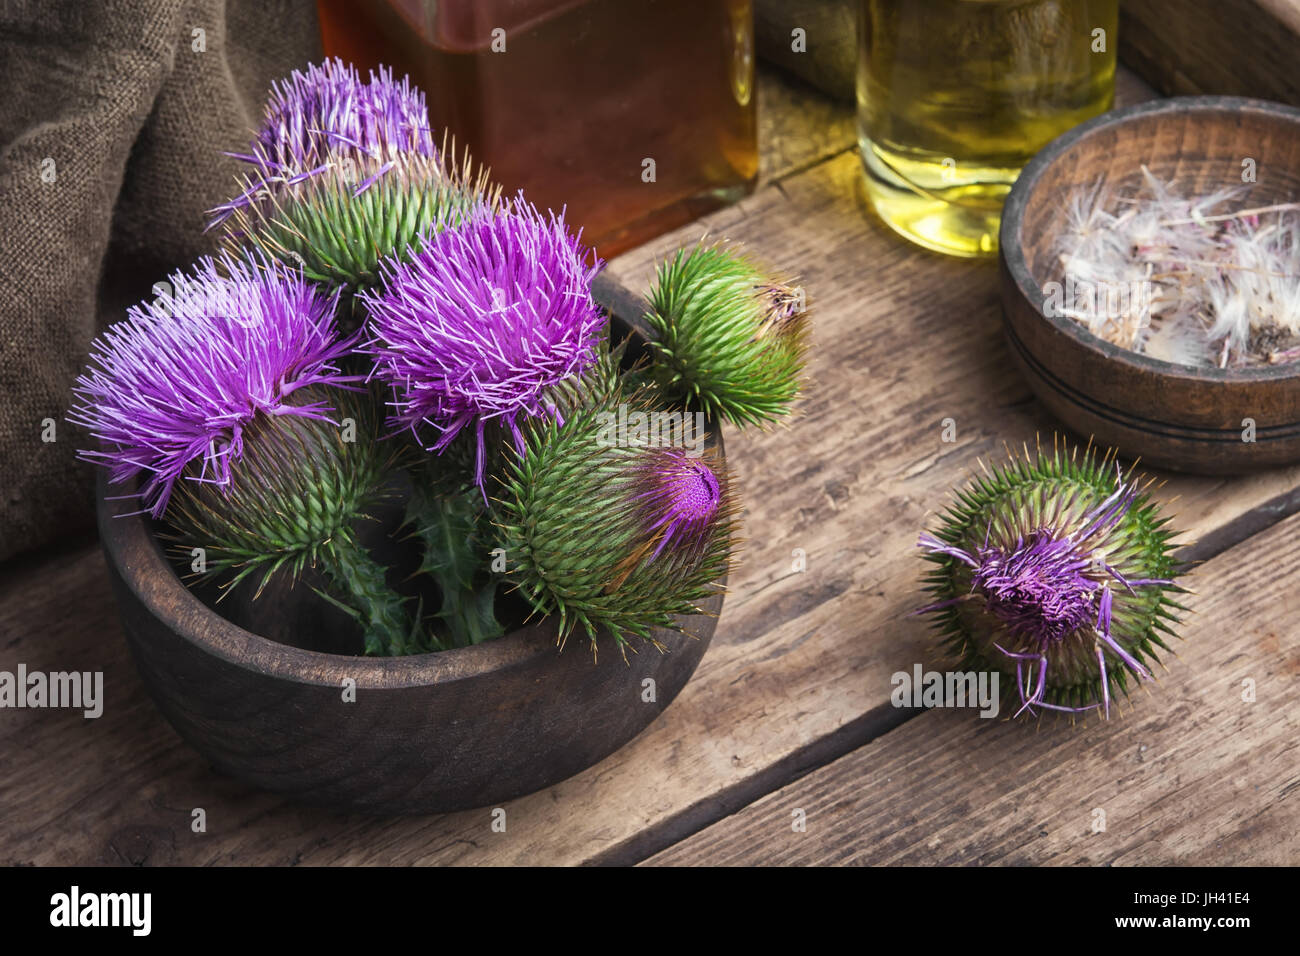 Wild medicinal plant thistle on wooden background.Milk Thistle plant Stock Photo